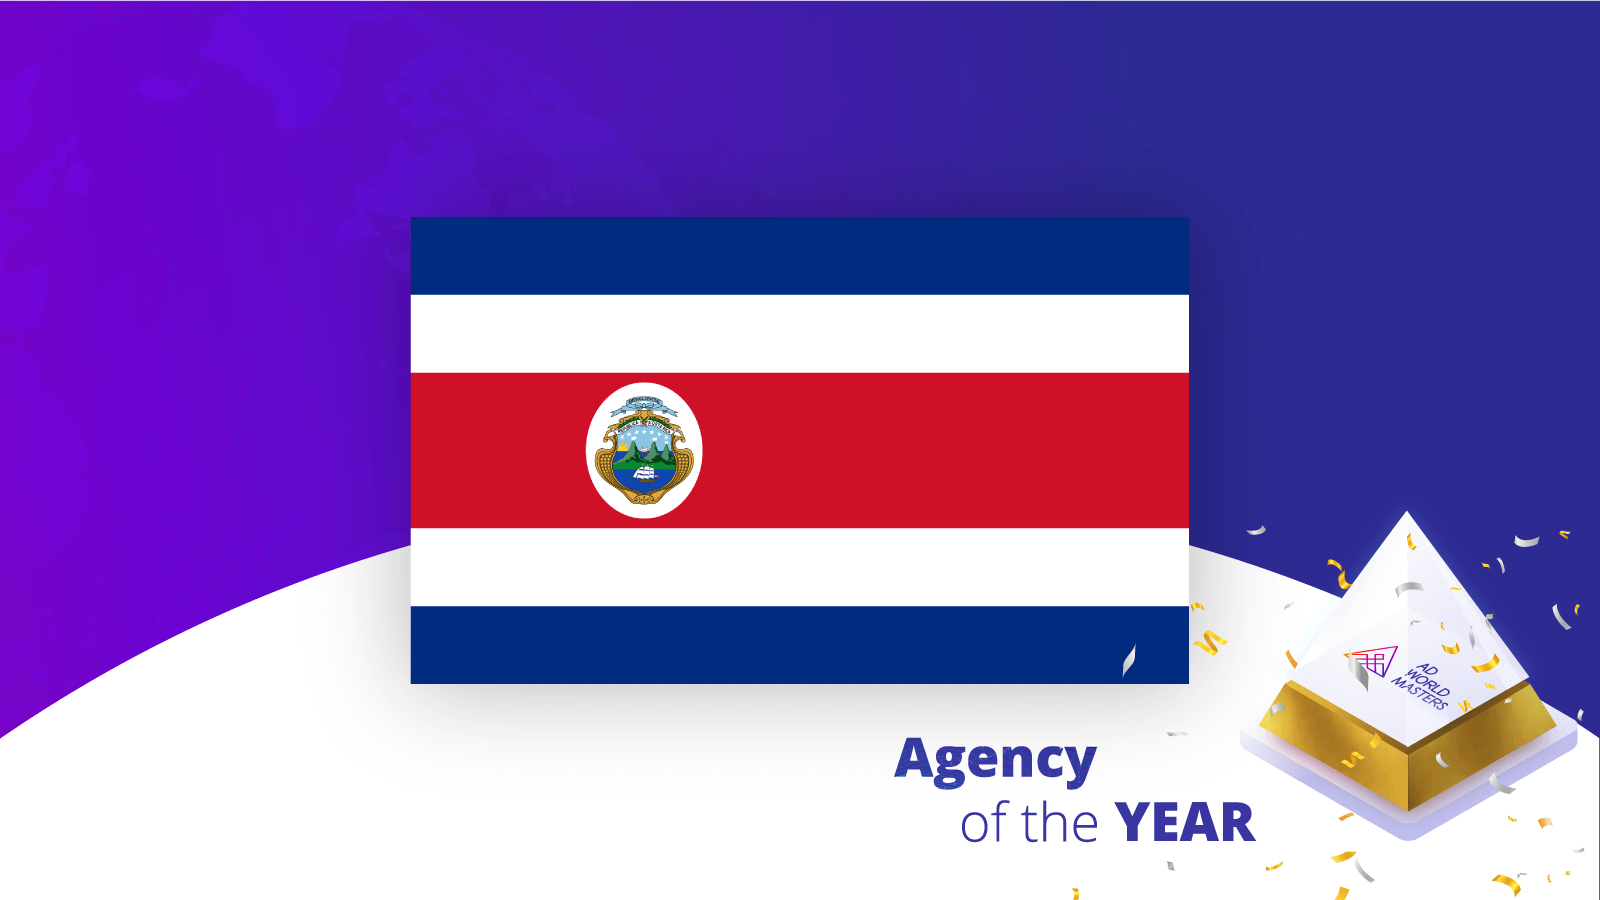 Agency of the year Costa Rica